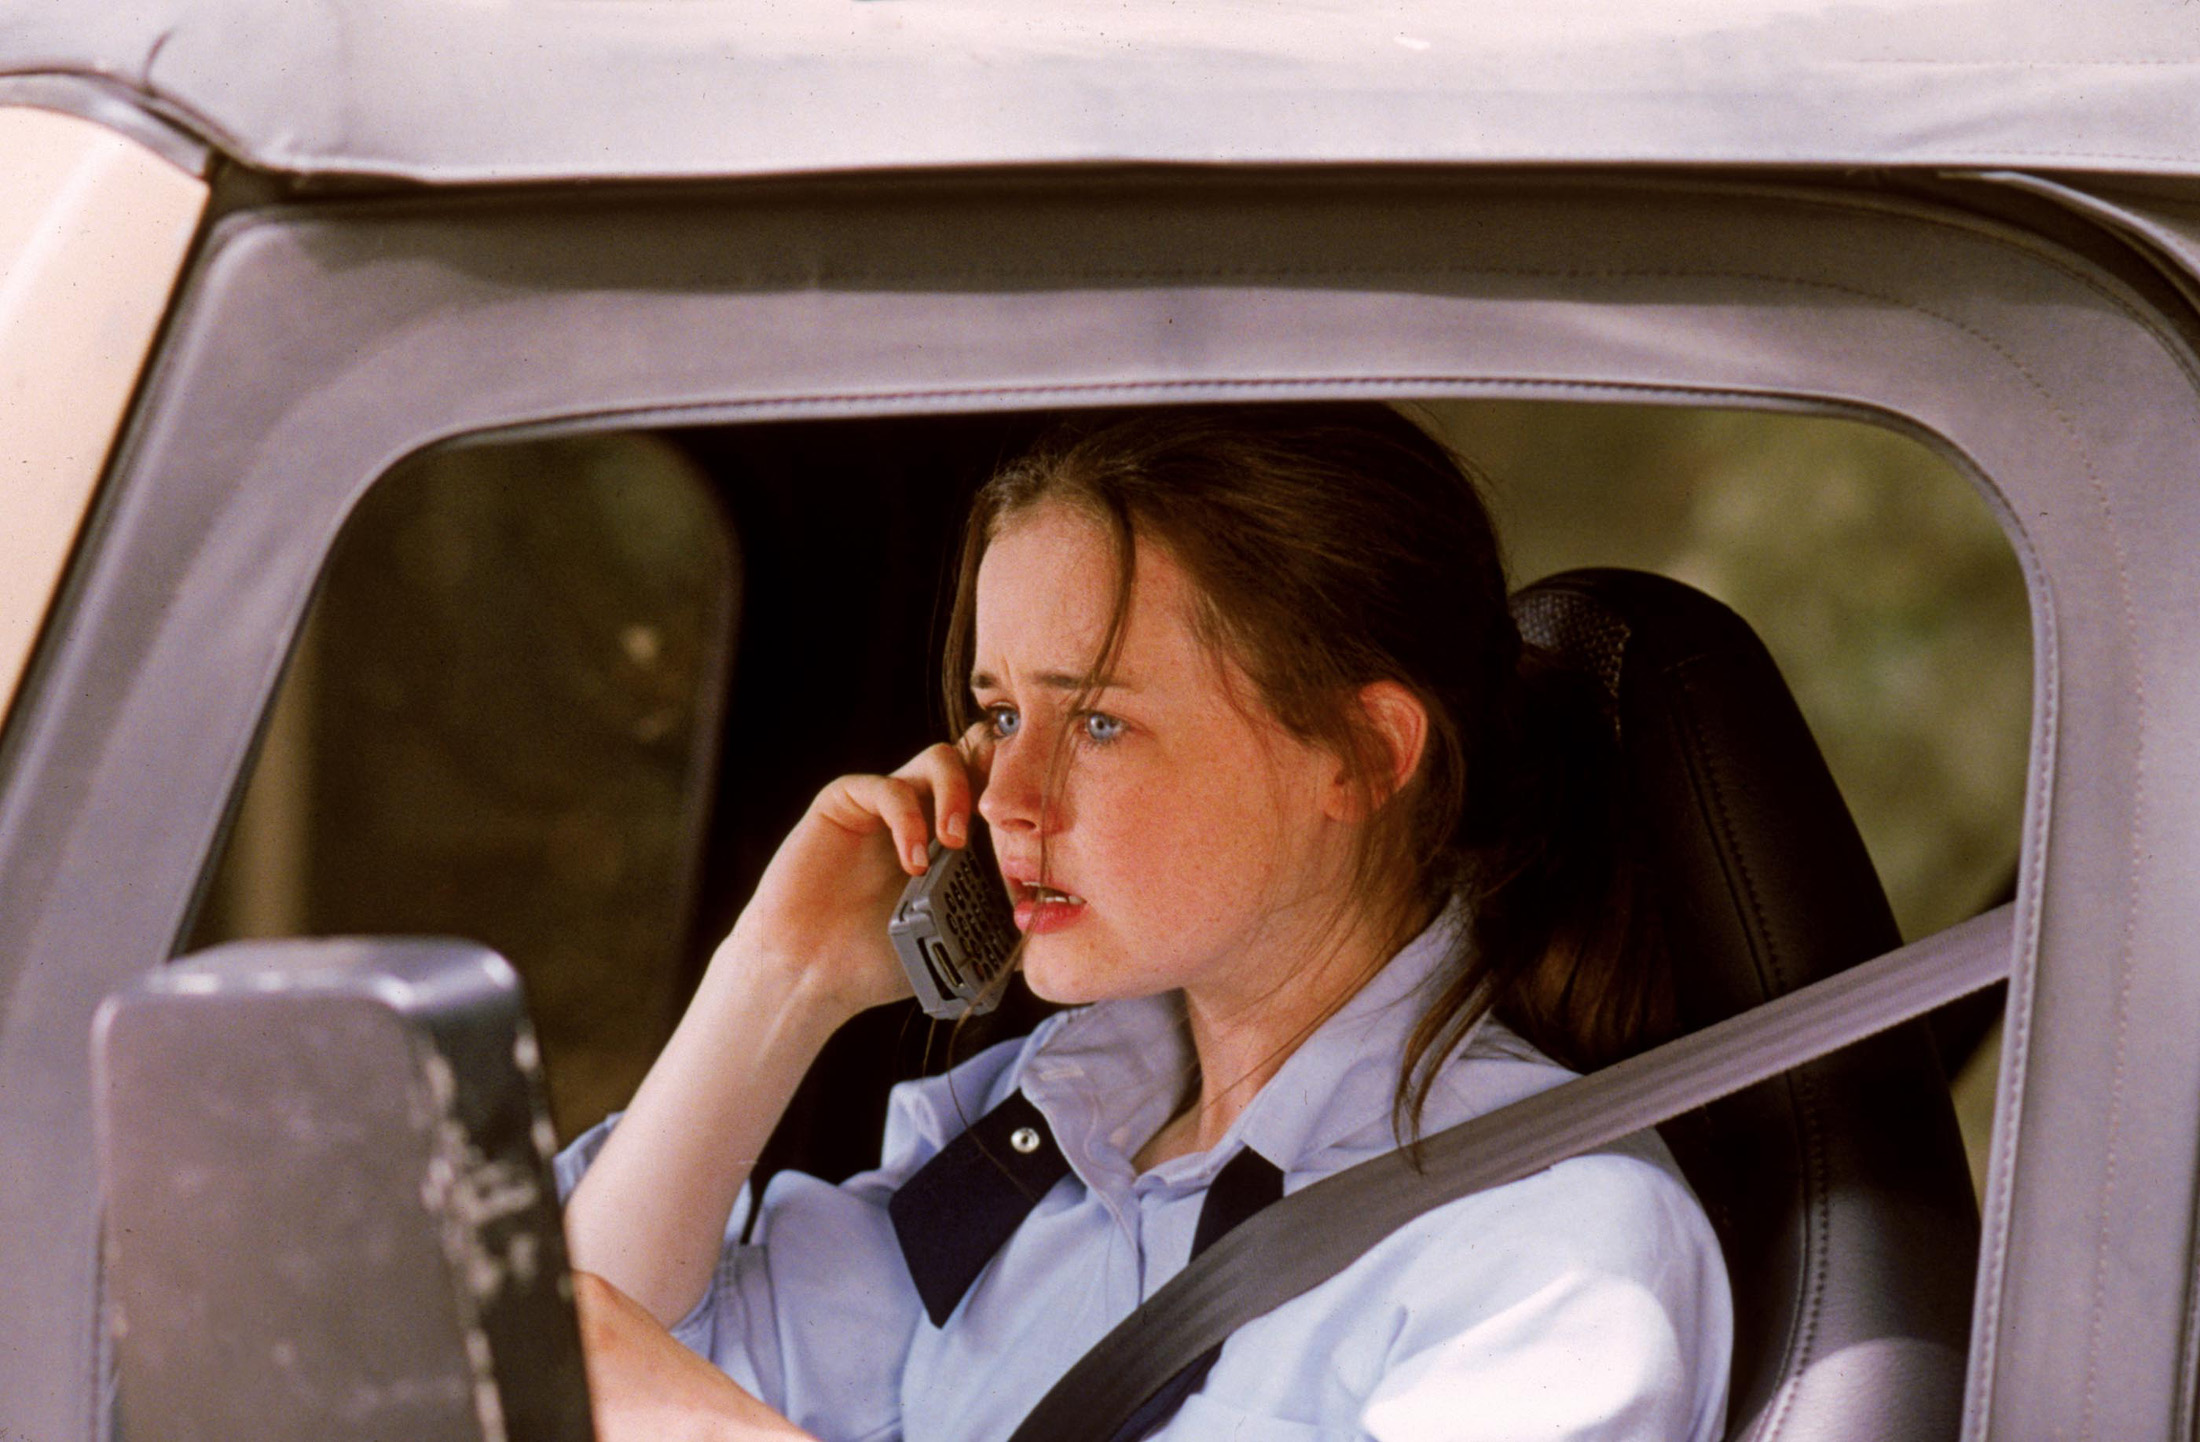 Rory sitting in the driver's seat of her Jeep holding a Motorola Startac to her ear. An expression of worry grips her face.